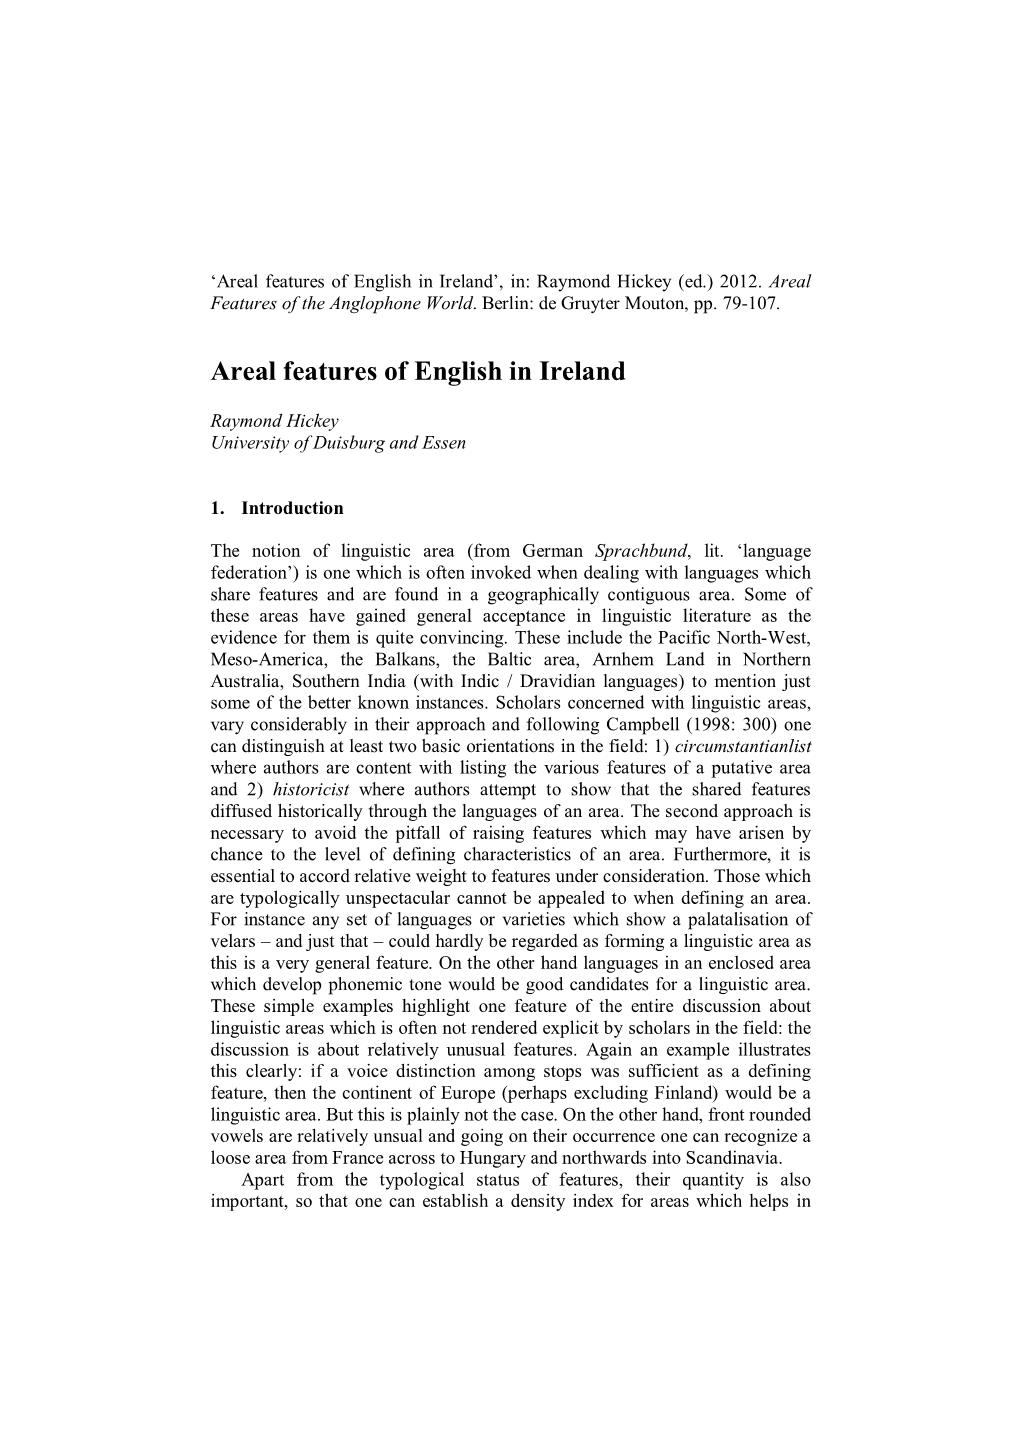 Areal Features of English in Ireland (Hickey 2012)